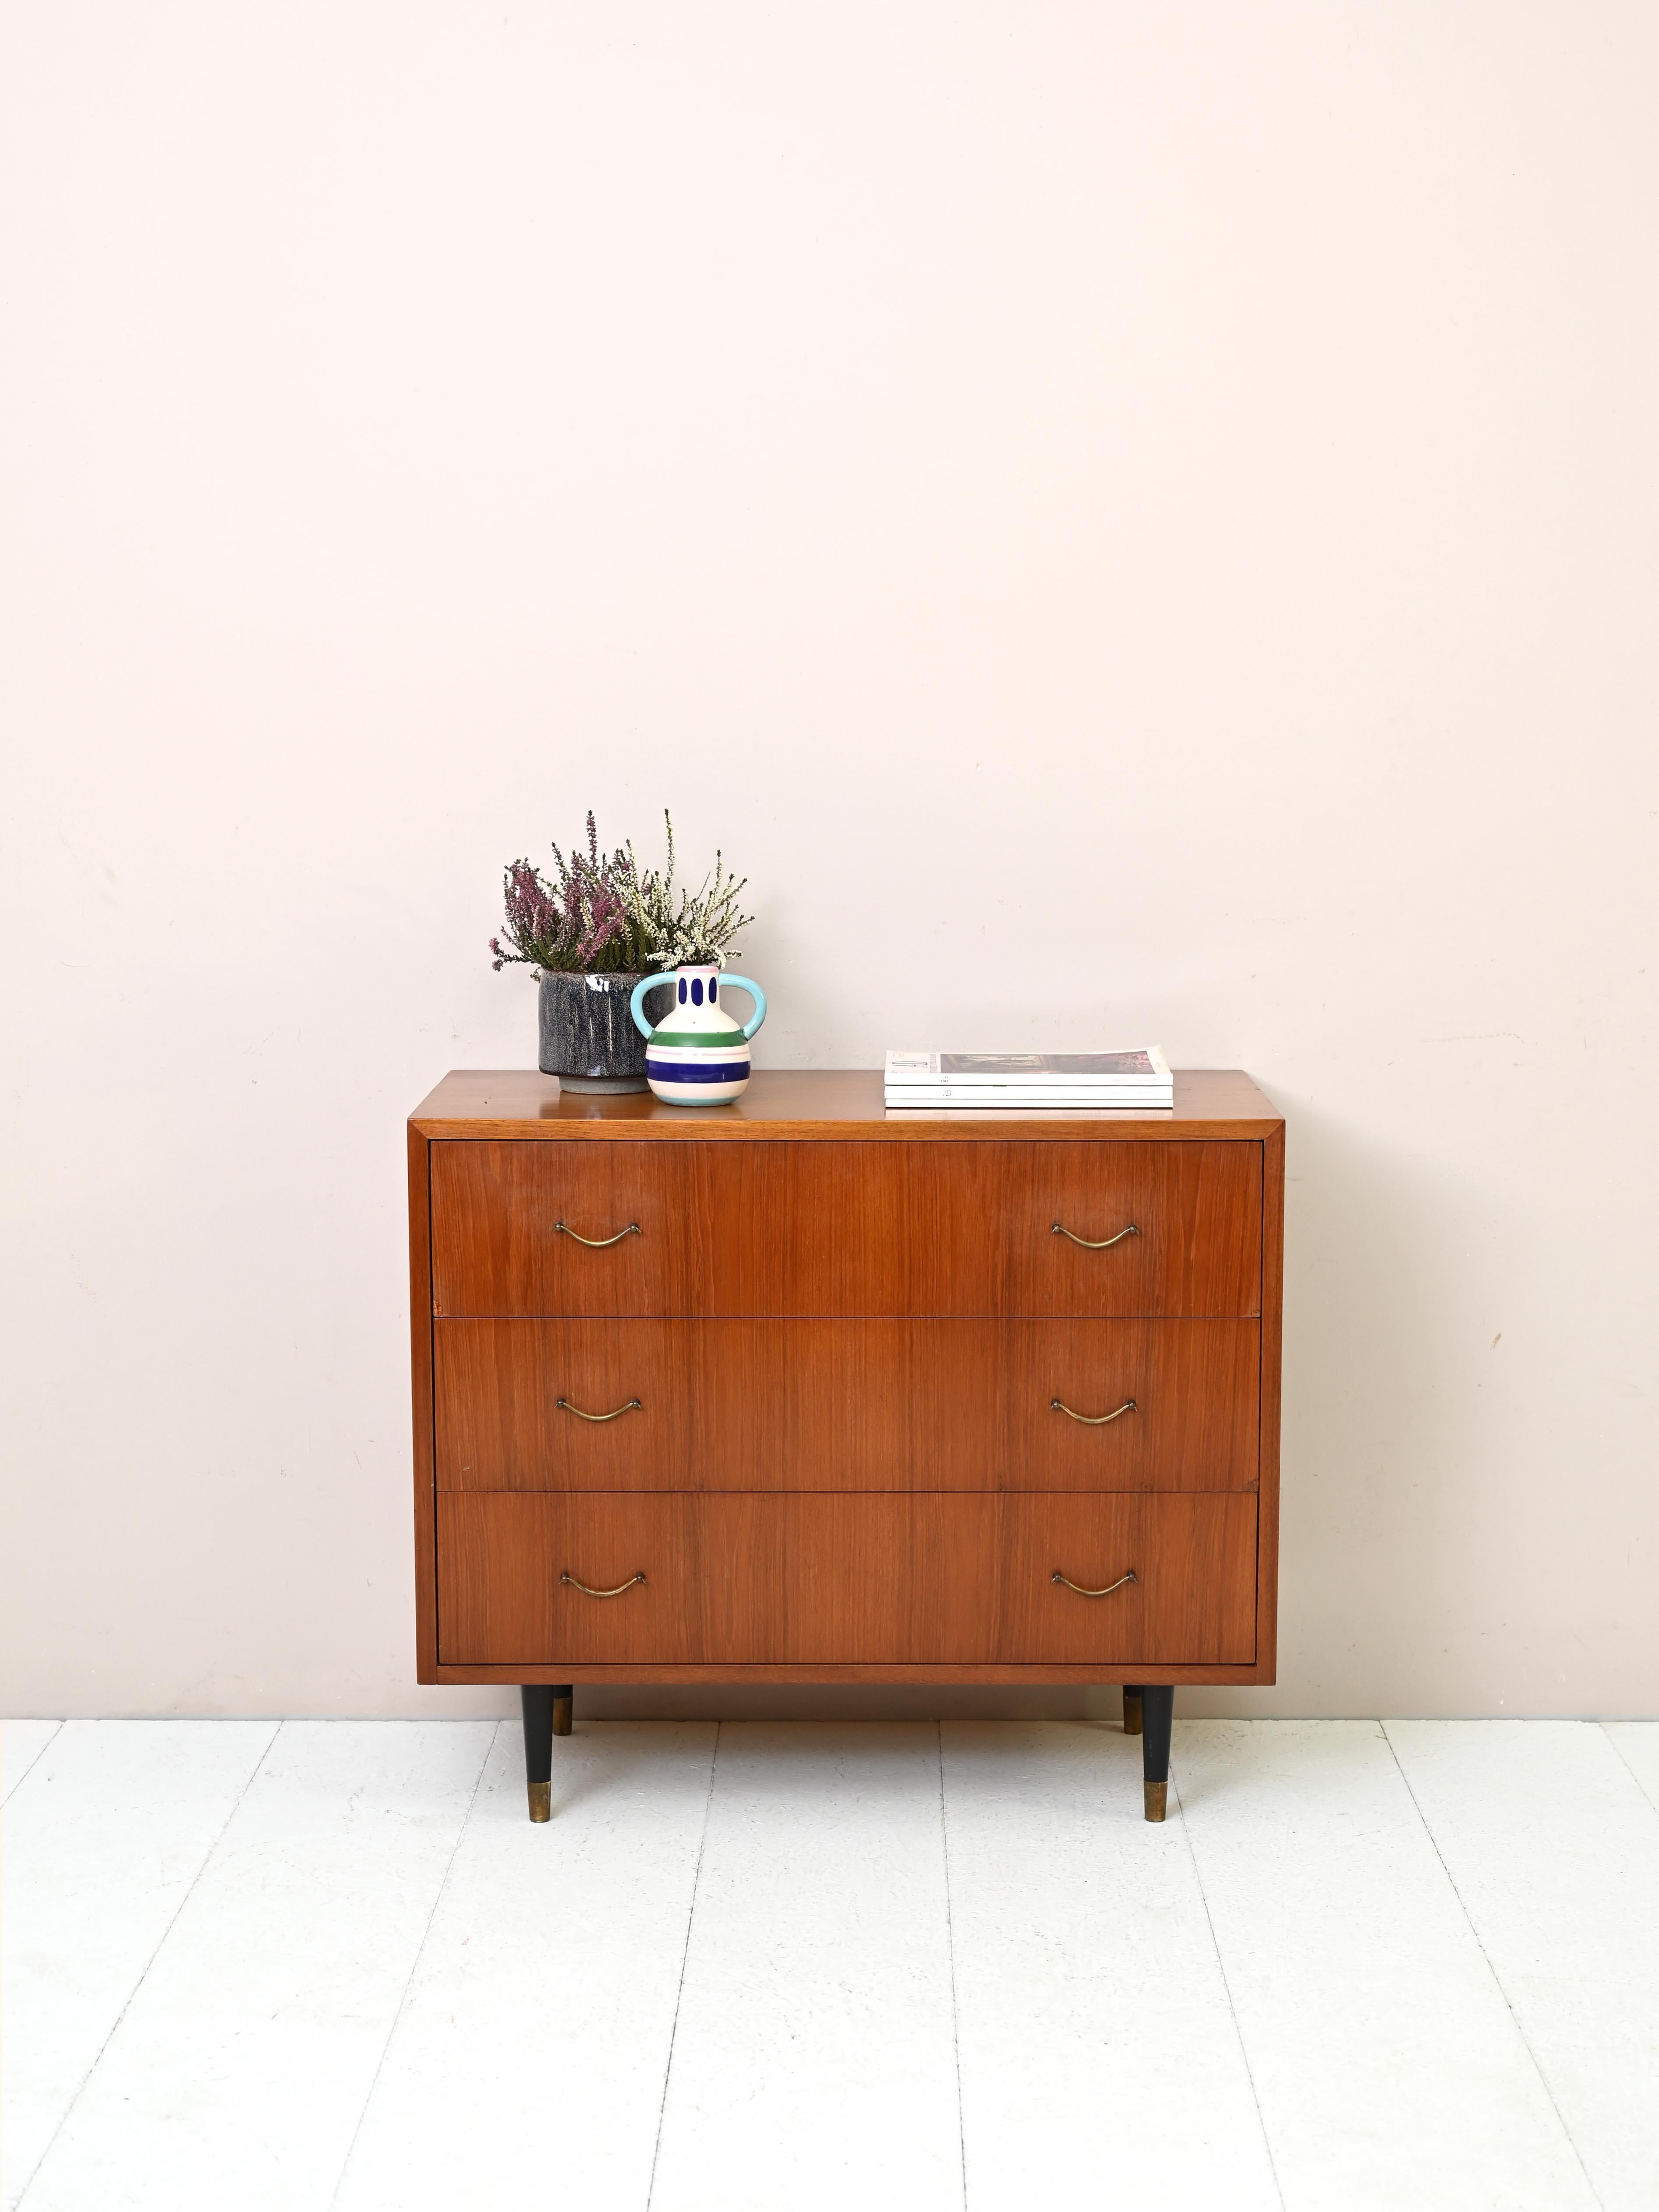 Vintage Scandinavian cabinet with drawers.

This chest of drawers is characterized by the square and regular shape of the frame embellished with golden details and black painted wooden legs.
Despite its small size, the drawers are spacious and